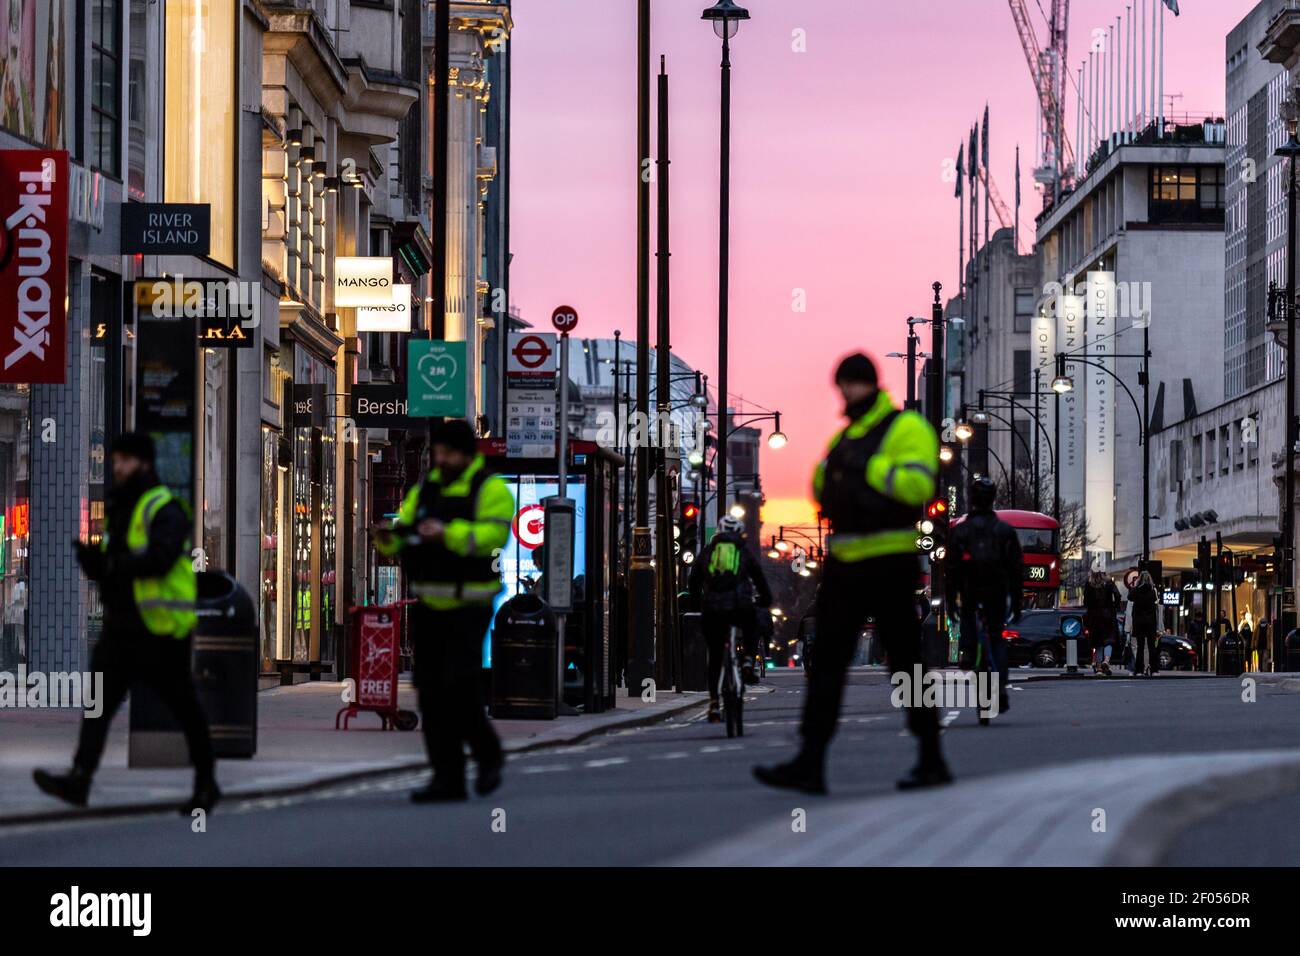 London, UK, March 6, 2021. Commuters cross Oxford Street as the sun sets over largely empty street during an ongoing third Coronavirus lockdown. Oxford Street is usually busy with crowds of shoppers. The Prime Minister Boris Johnson has set a road map on easing the restrictions. Credit: Dominika Zarzycka/Alamy Live News Stock Photo